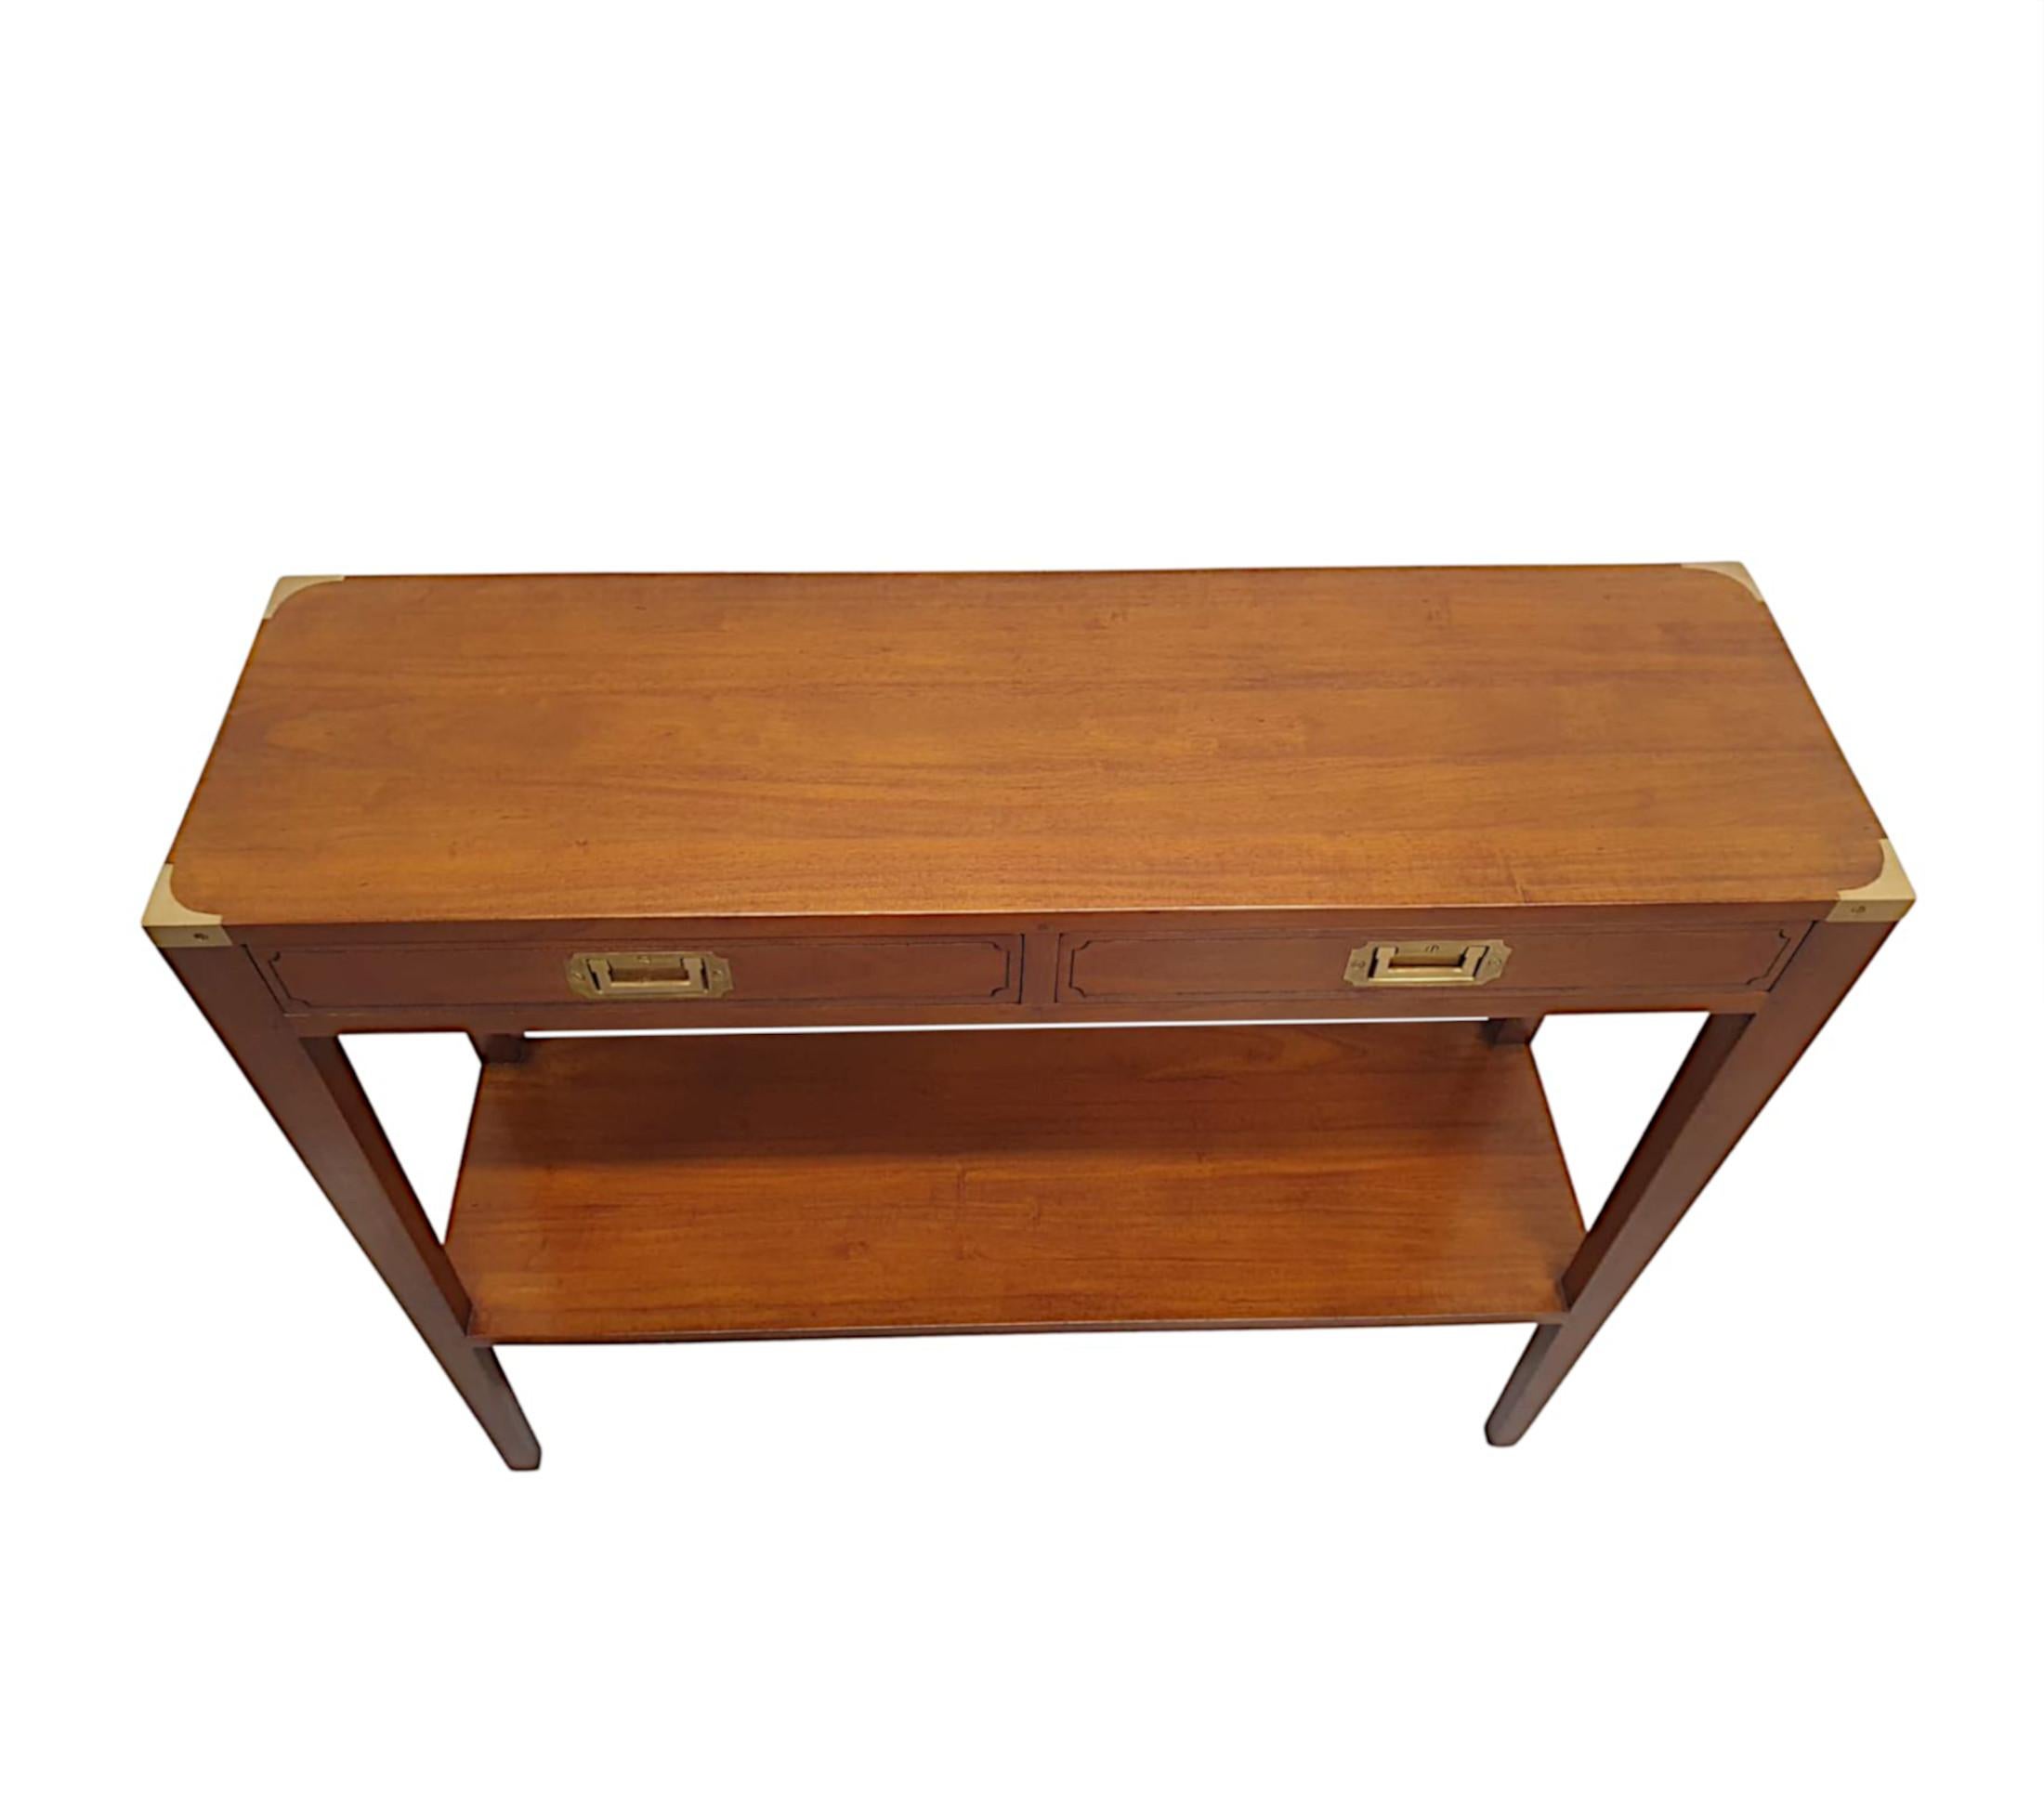 A fine cherrywood, brass mounted campaign style console table of fabulous quality and with a rich patination to the wood.  The moulded top of rectangular form fitted with brass corner mounts is raised over simple two drawer frieze with gorgeous